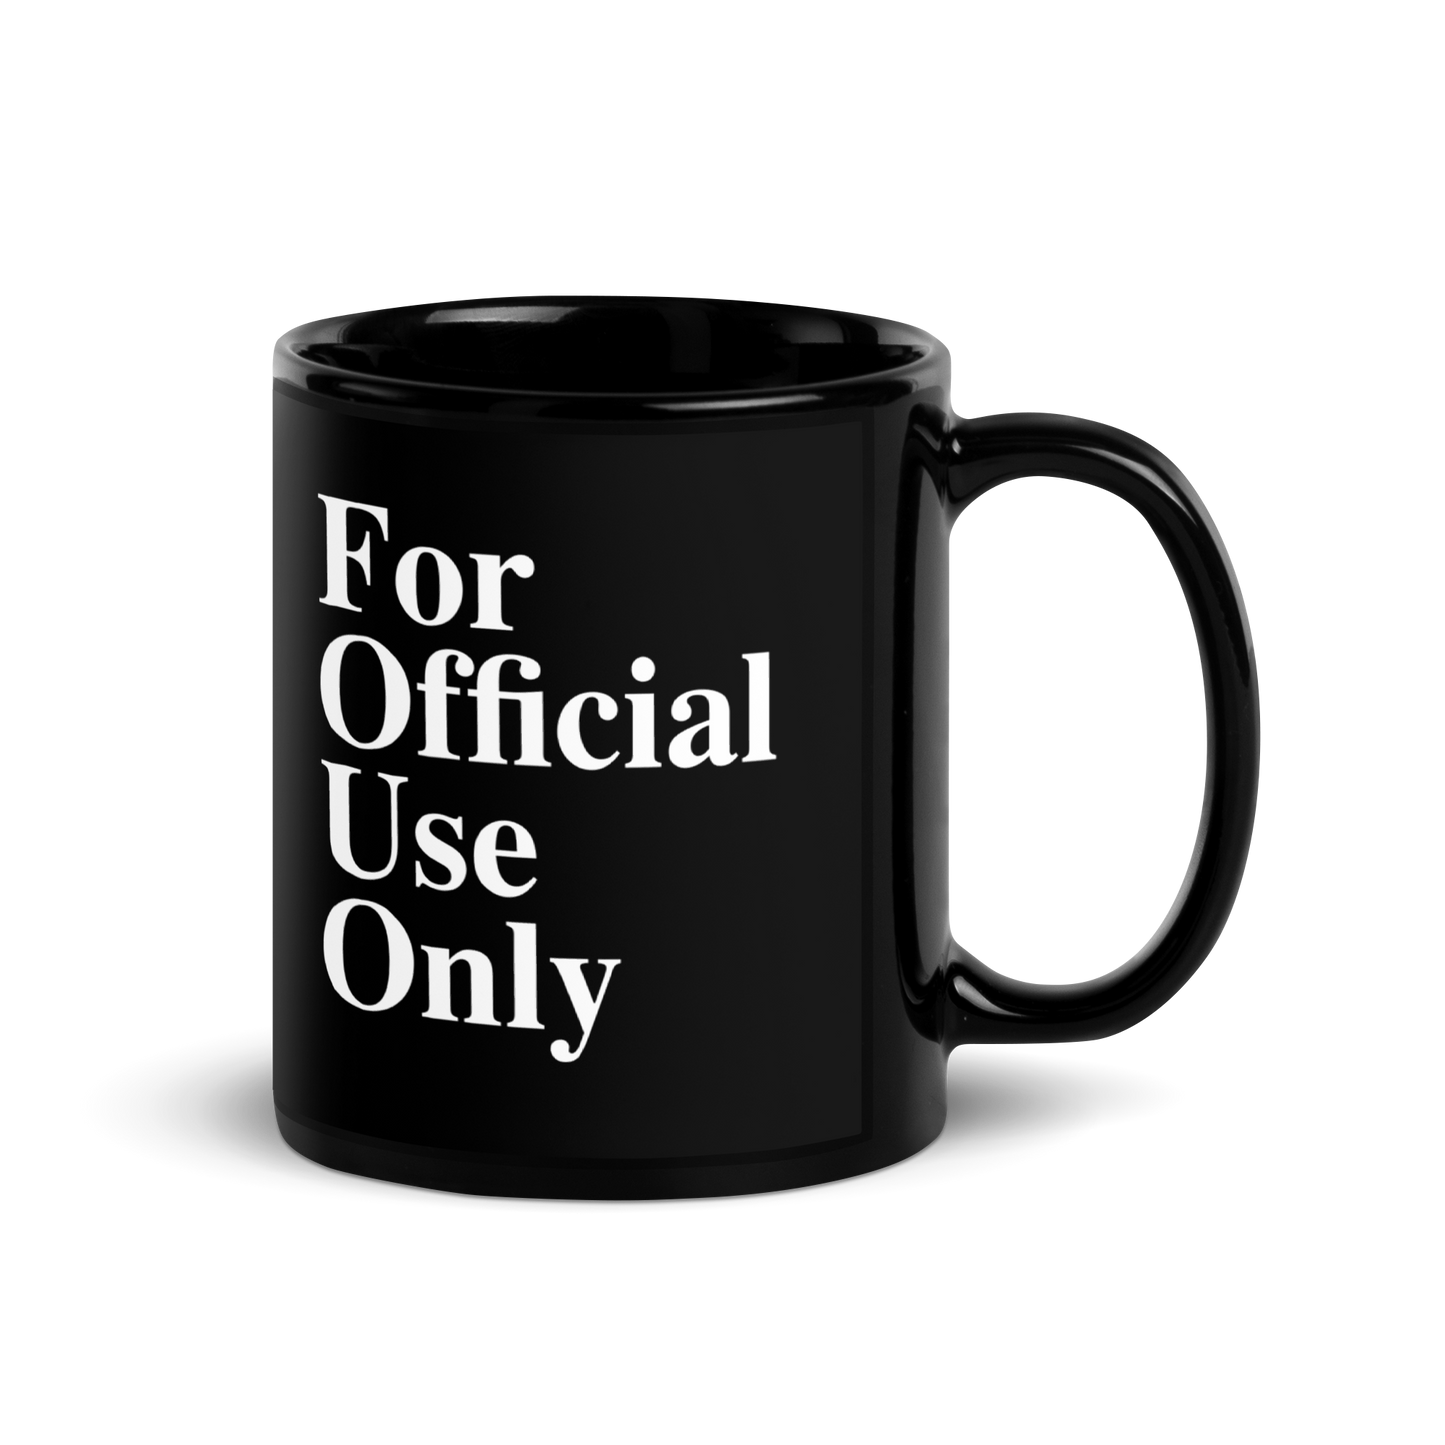 For Official Use Only Mug